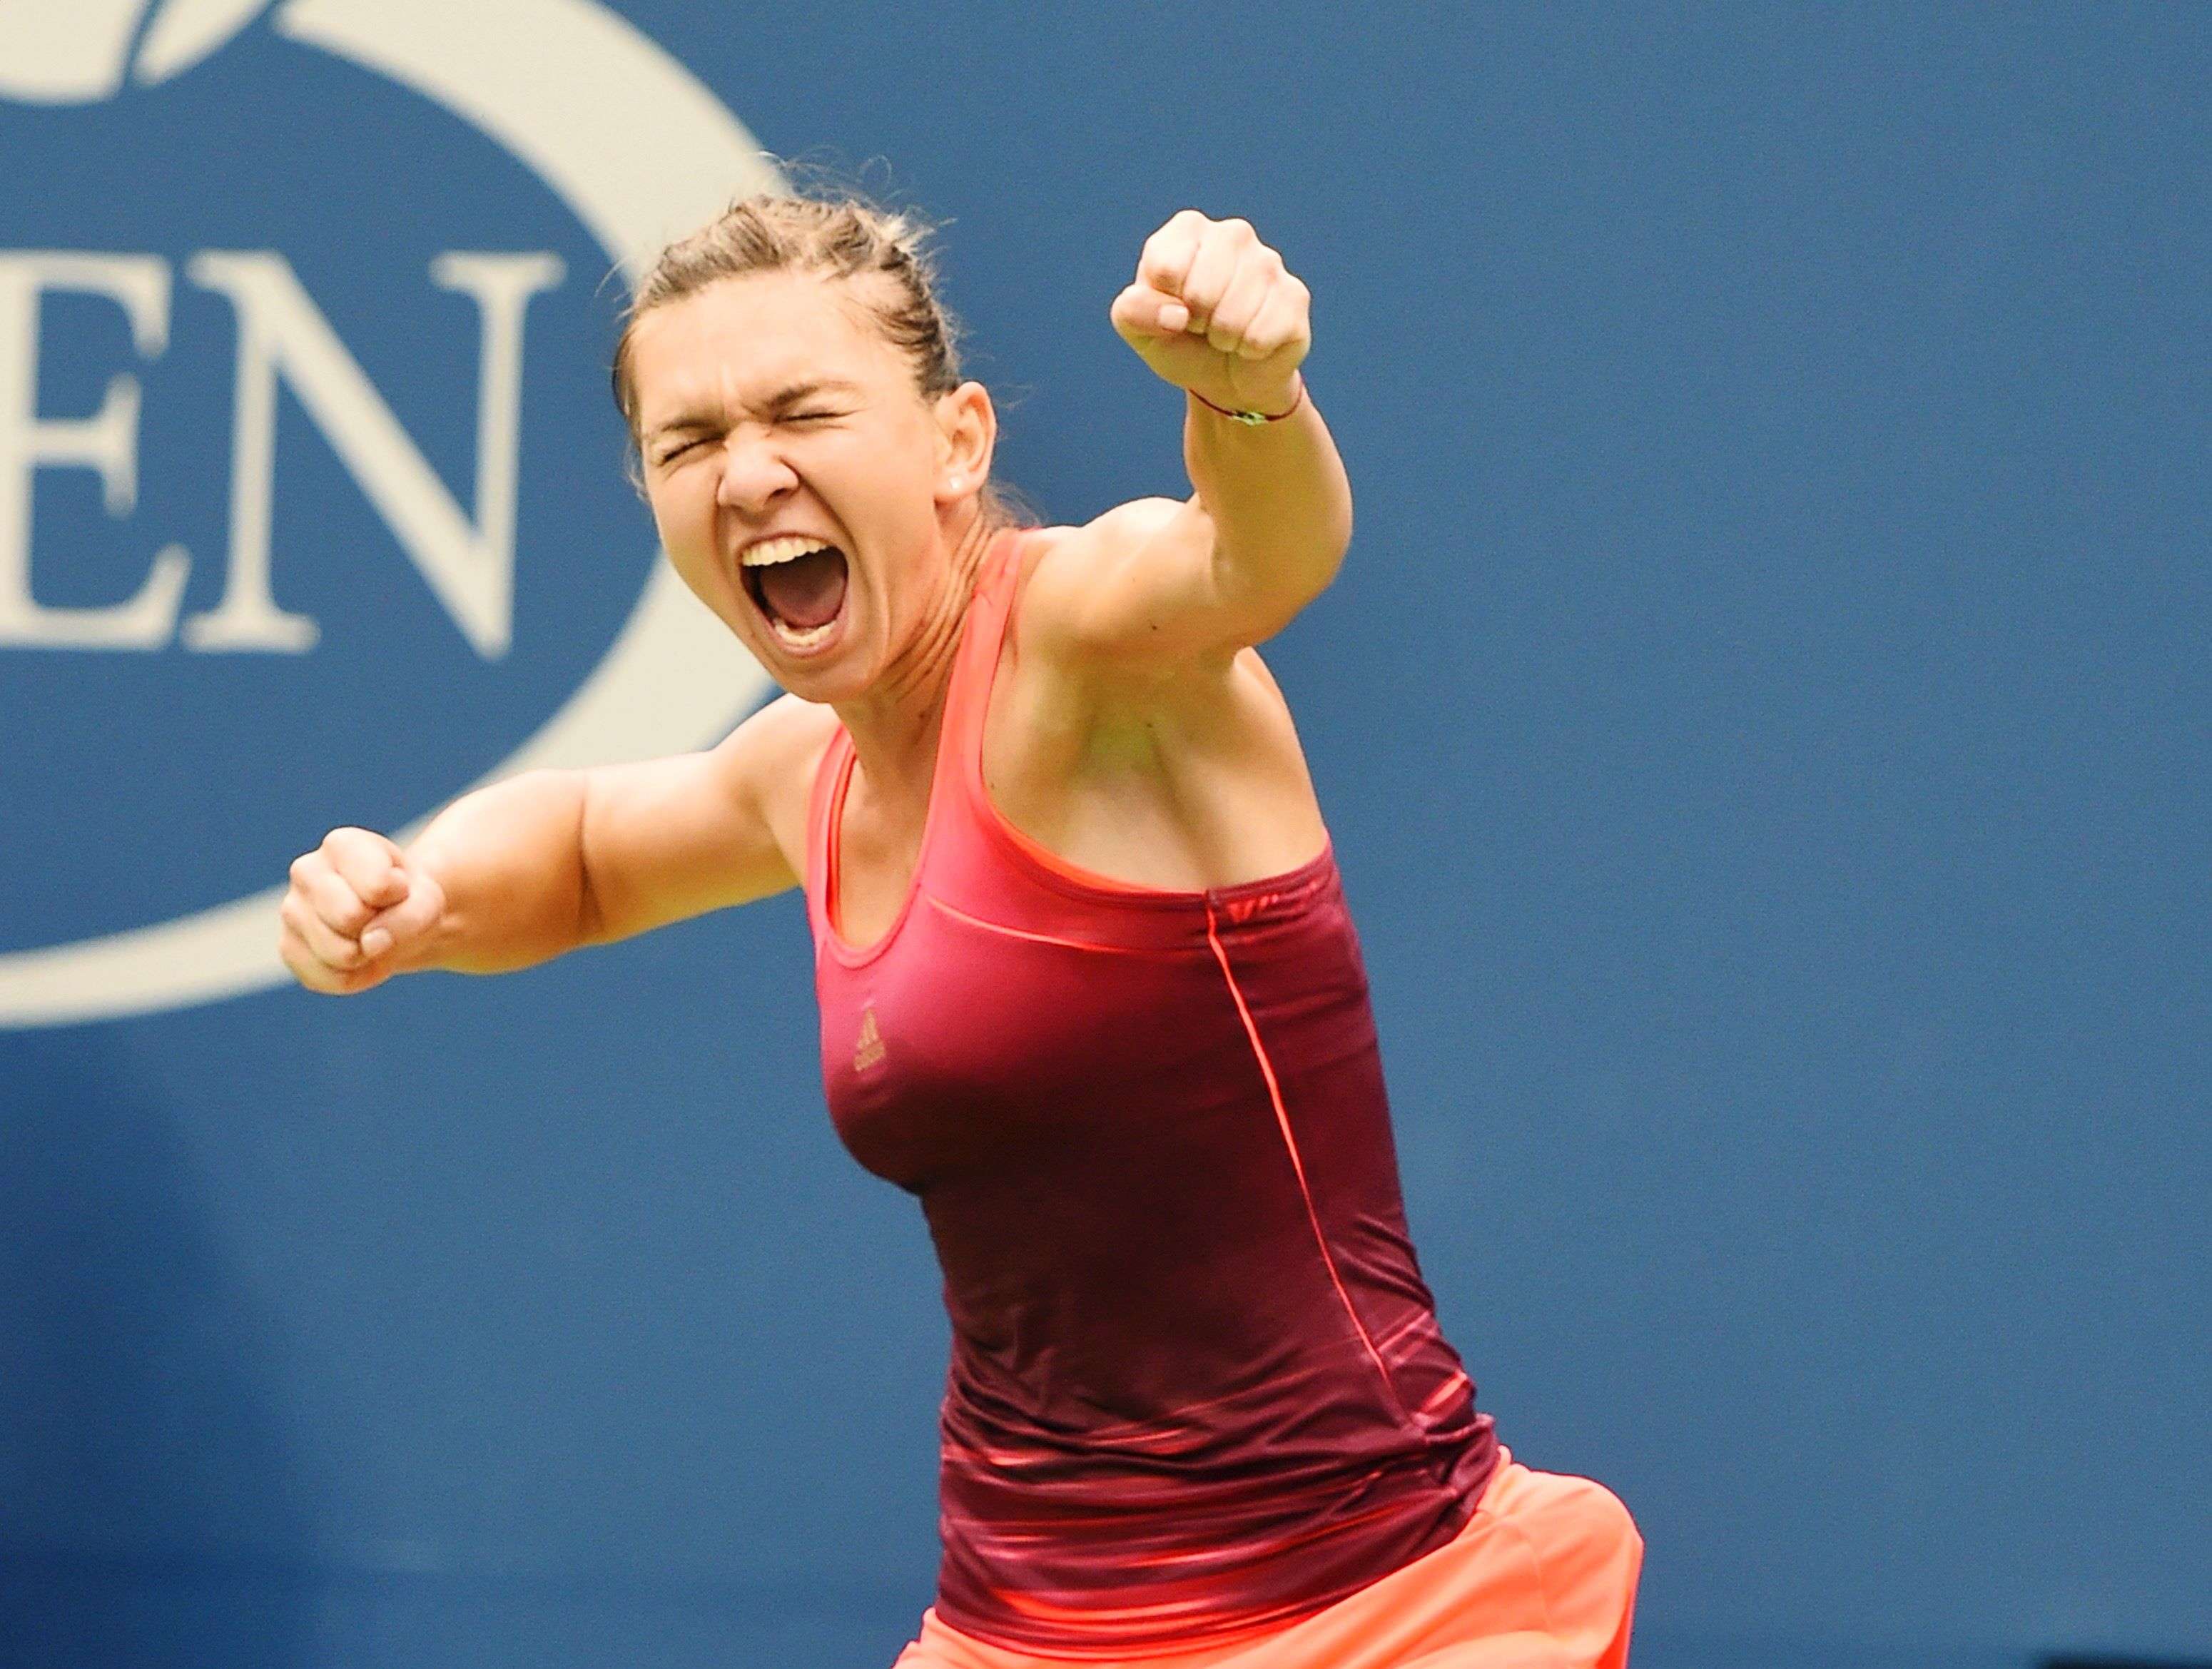 Simona Halep of Romania celebrates match point against Victoria Azarenka of Belarus during their 2015 US Open  Women's Singles-Quarterfinals at the USTA Billie Jean King National Tennis Center September 9, 2015  in New York.  AFP PHOTO/  TIMOTHY  A. CLARY